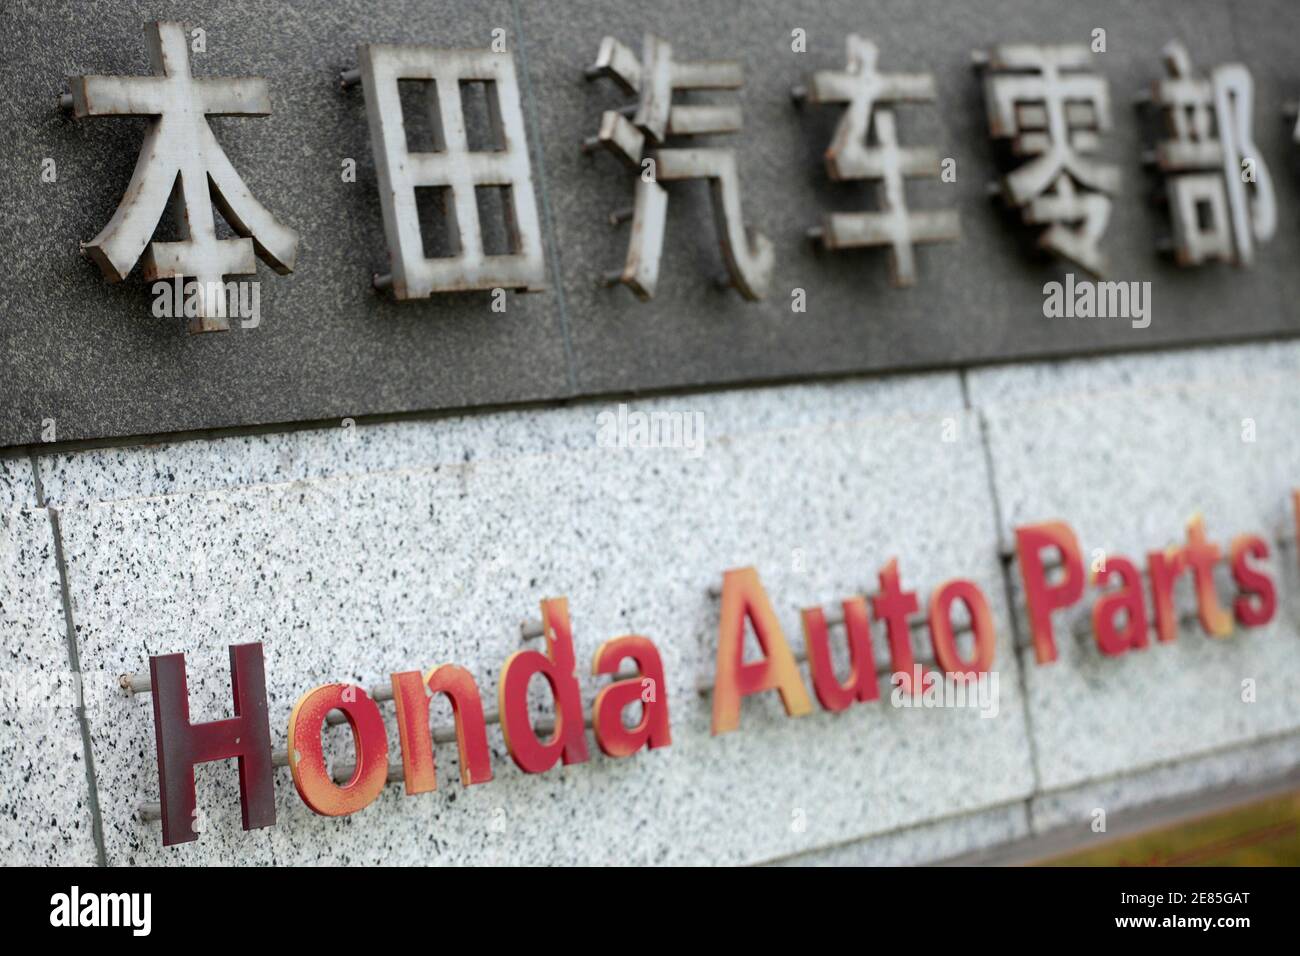 A sign of the Honda Auto Parts Manufacturing Co. Ltd. plant is seen in Foshan, southern Chinese Guangdong province, June 4, 2010. Honda Motor Co said its four car plants in China would likely stay suspended at least through Thursday as negotiations to smooth over a labour dispute at a parts plant continue. REUTERS/Tyrone Siu (CHINA - Tags: TRANSPORT BUSINESS) Stock Photo